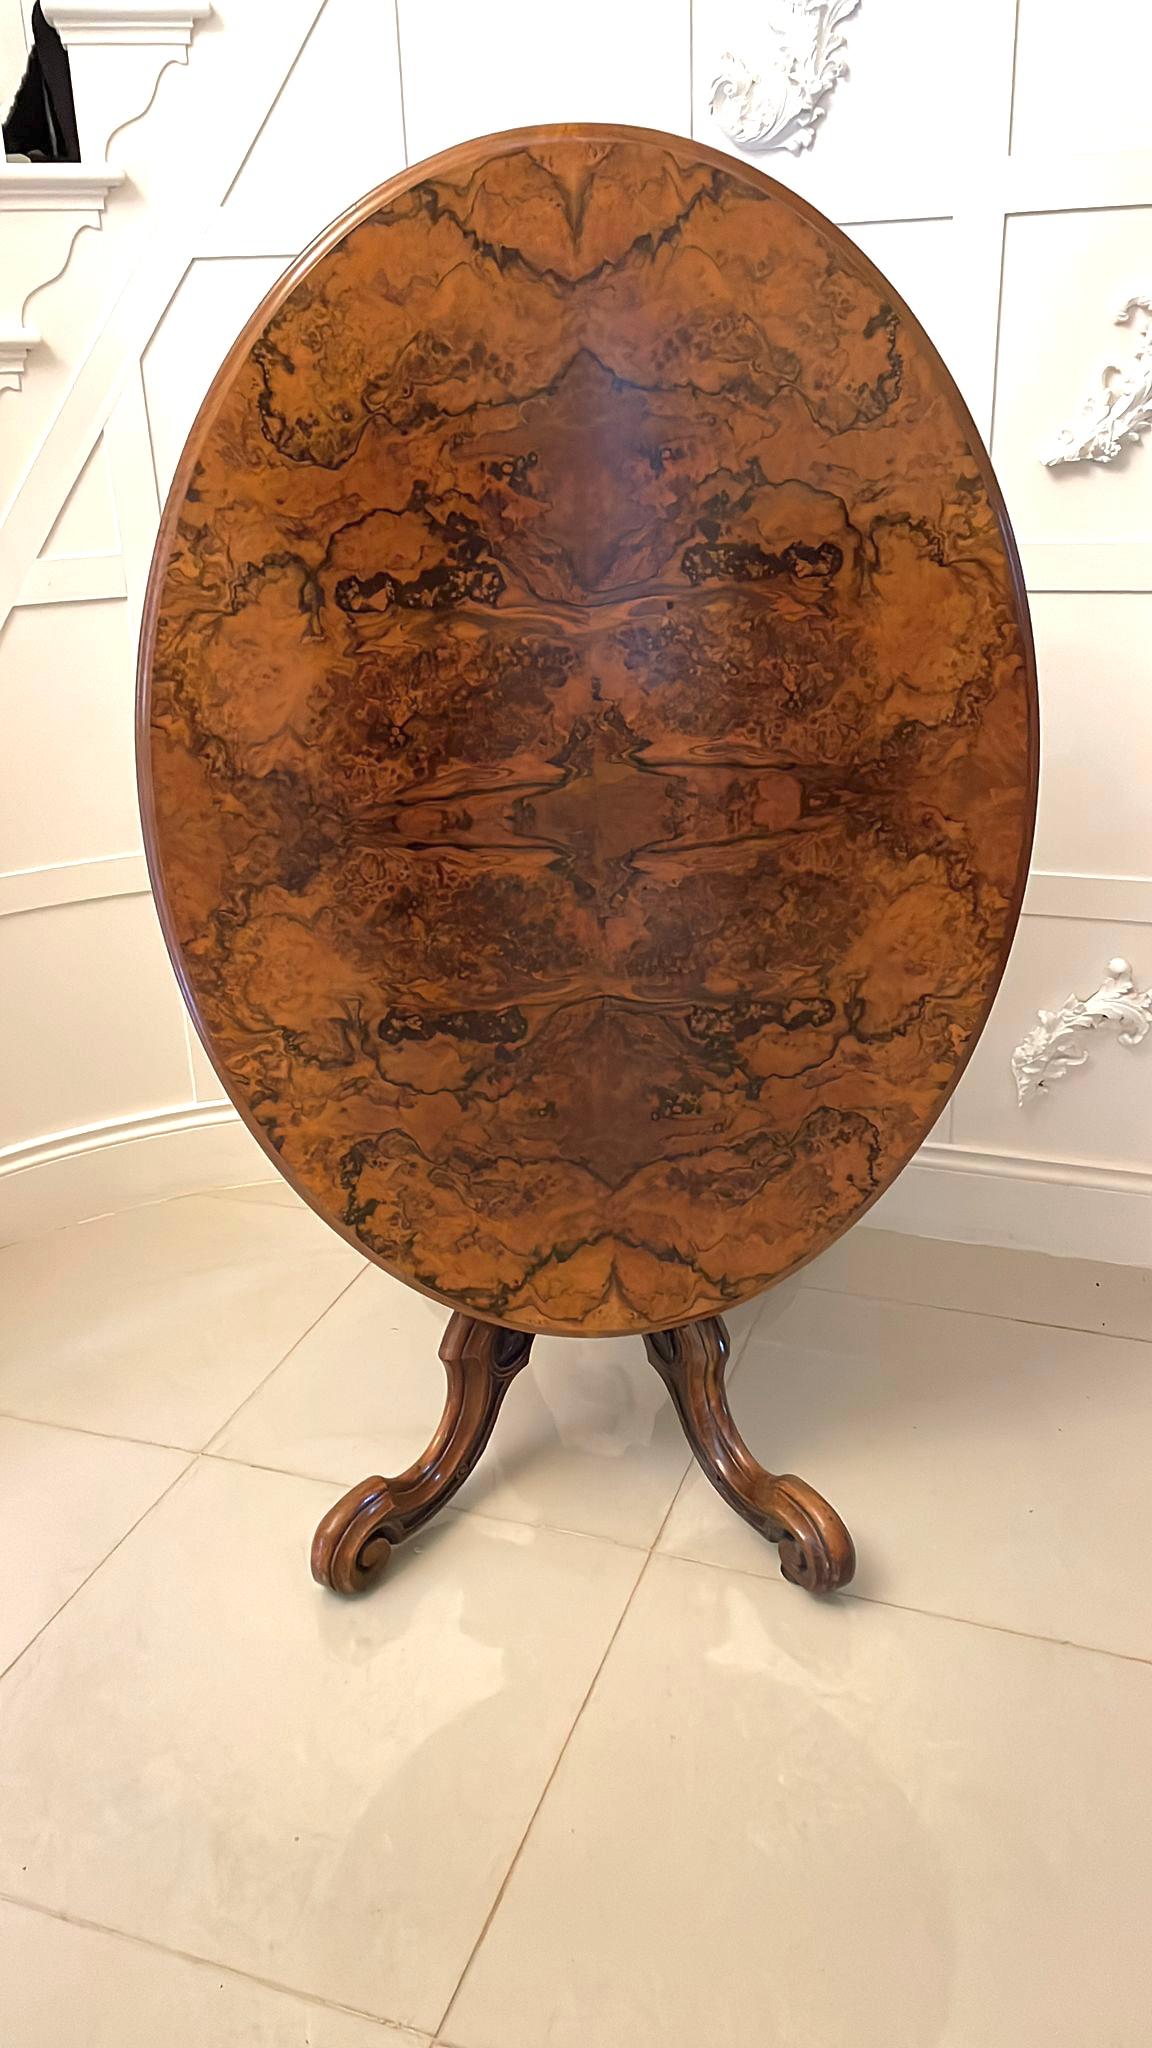 Outstanding quality antique Victorian oval burr walnut centre table having an outstanding quality oval burr walnut tilt top with a thumb moulded edge supported by a superb quality carved solid walnut turned shaped column raised by four carved solid